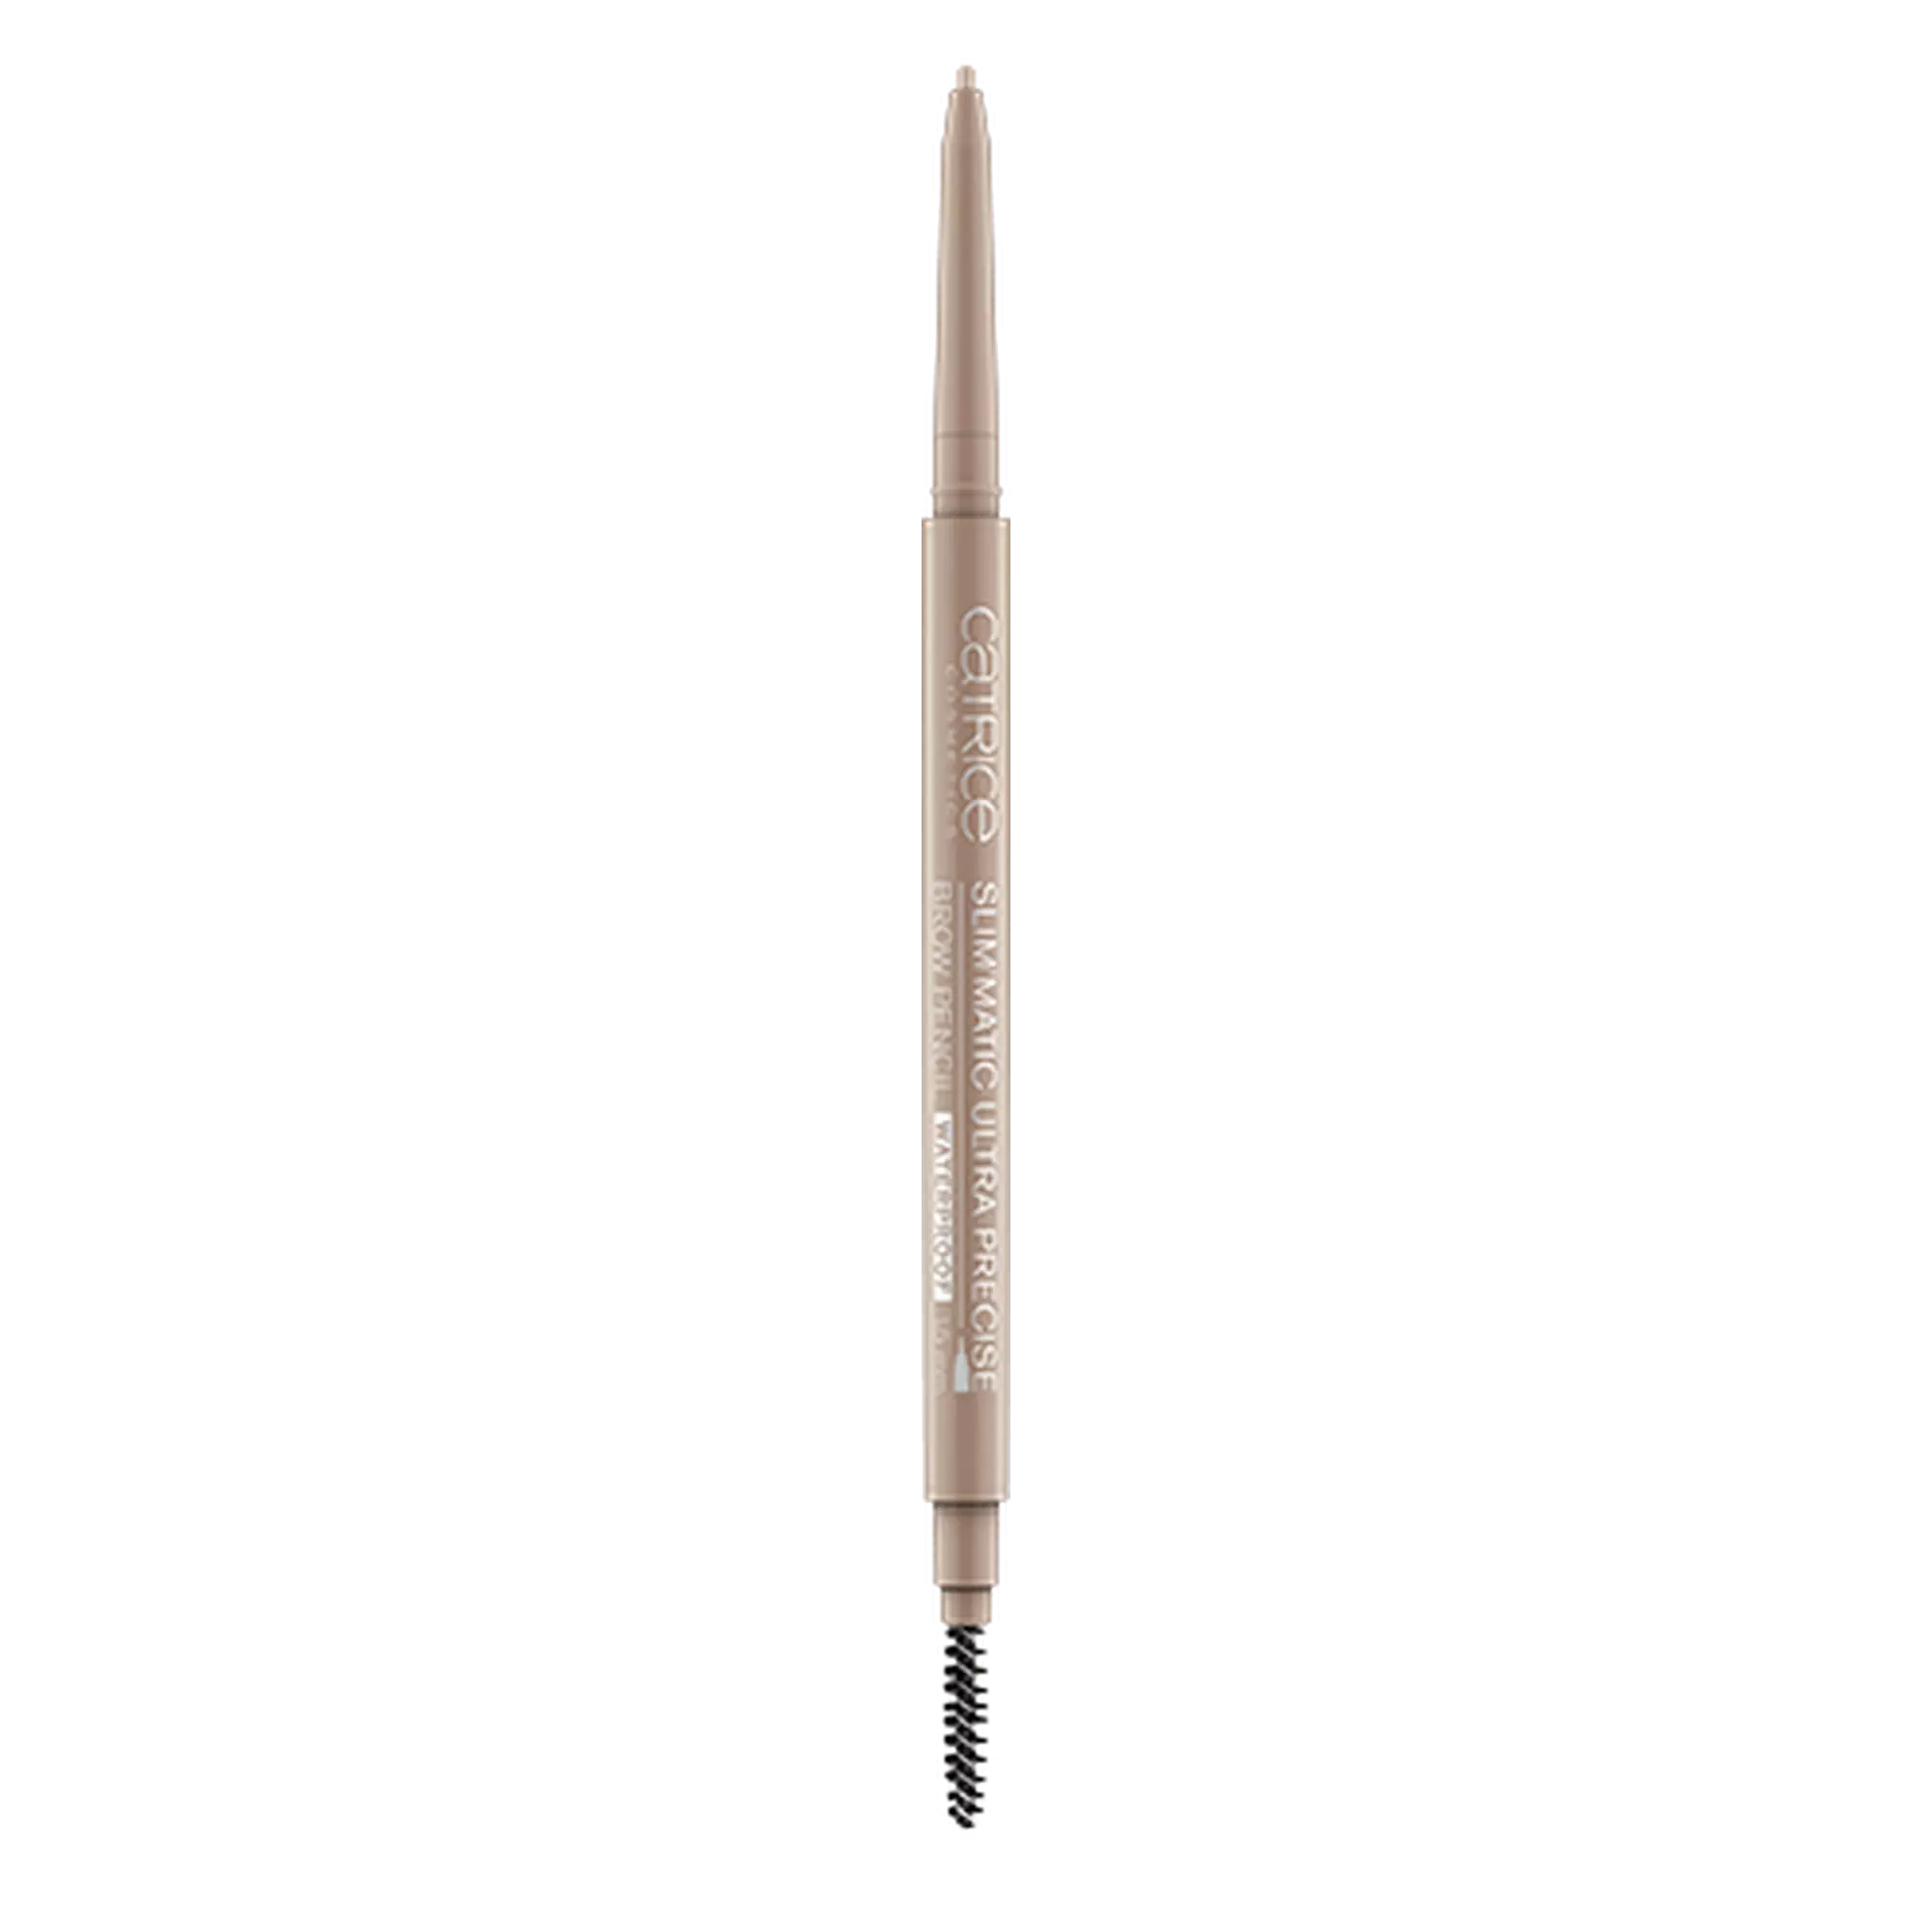 Catrice Slim'matic Waterproof Brow Pencil With Spooly Brush In Colour 015 Ash Blonde